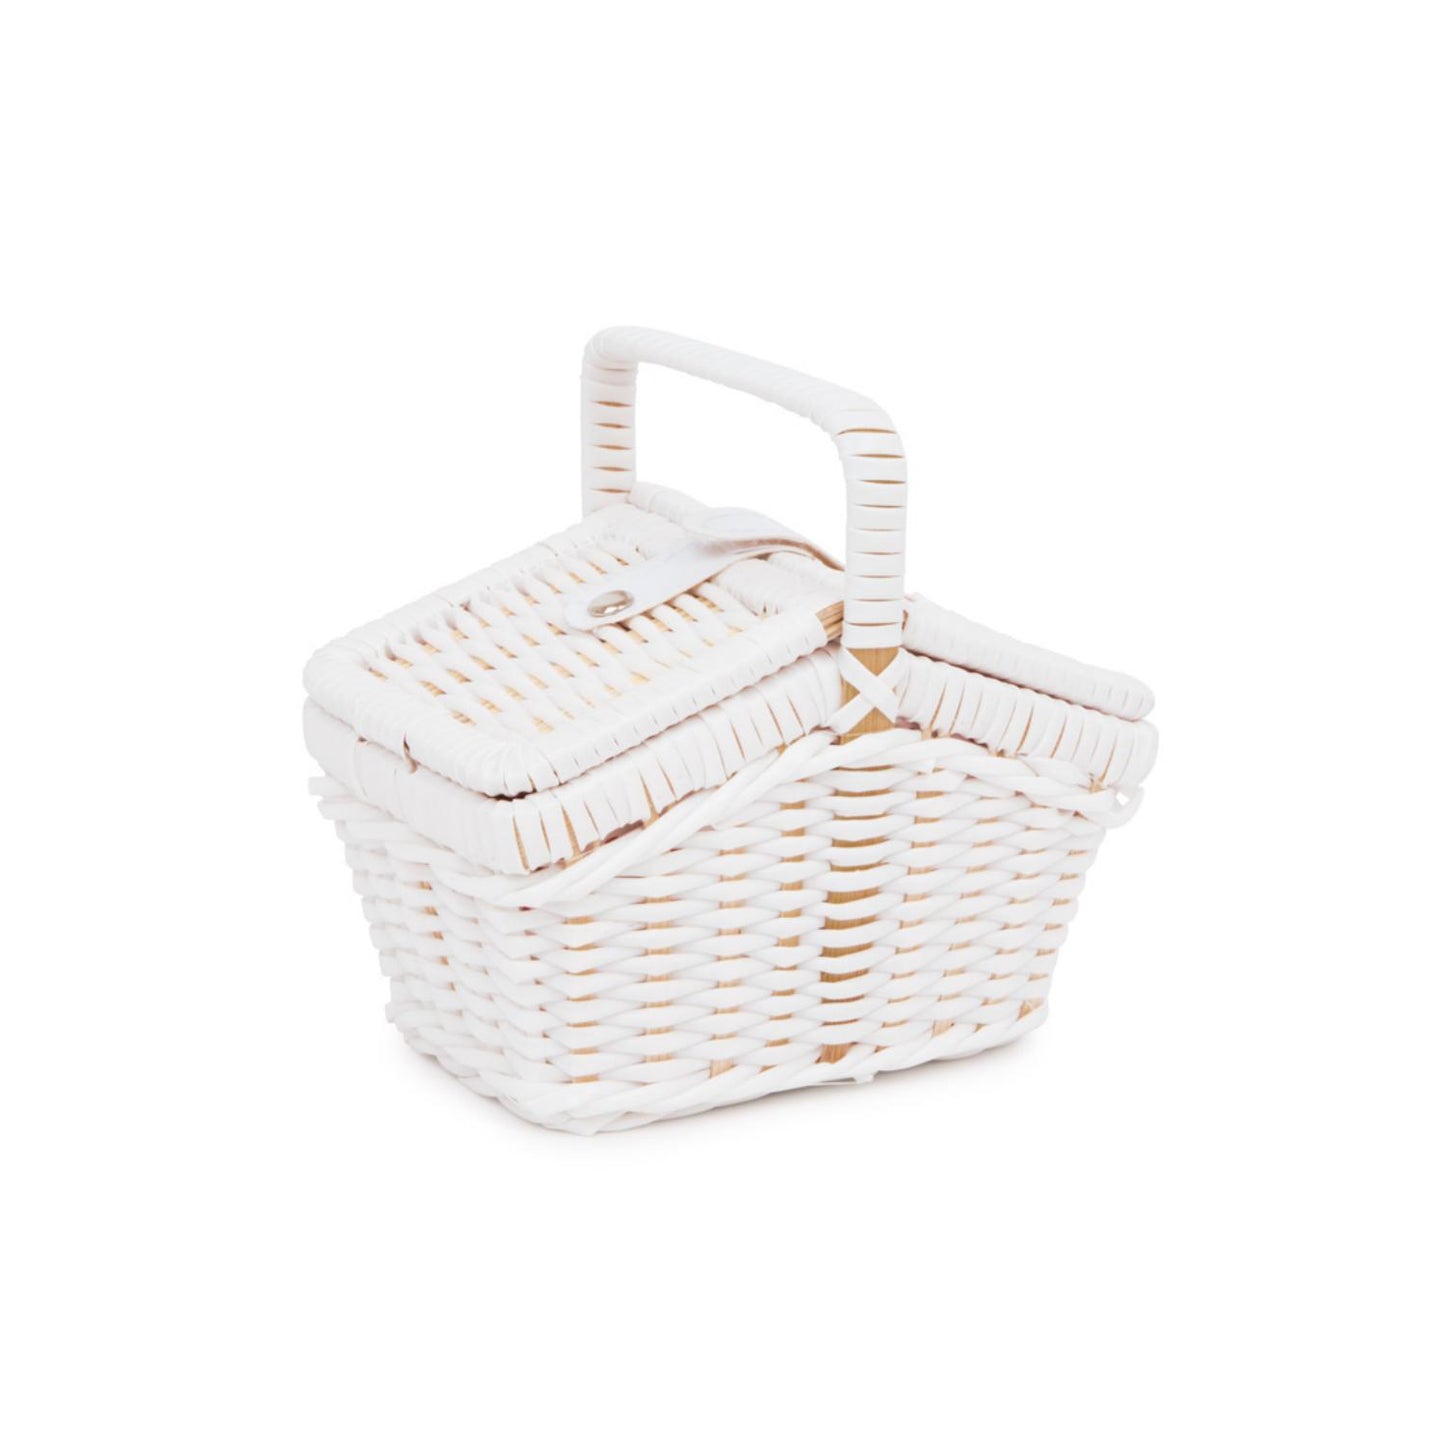 Picnic Basket Ceramic Tea Set | Pretend Play Toy for Children | Front View: Basket Closed and All Items Presented | BeoVERDE.ie